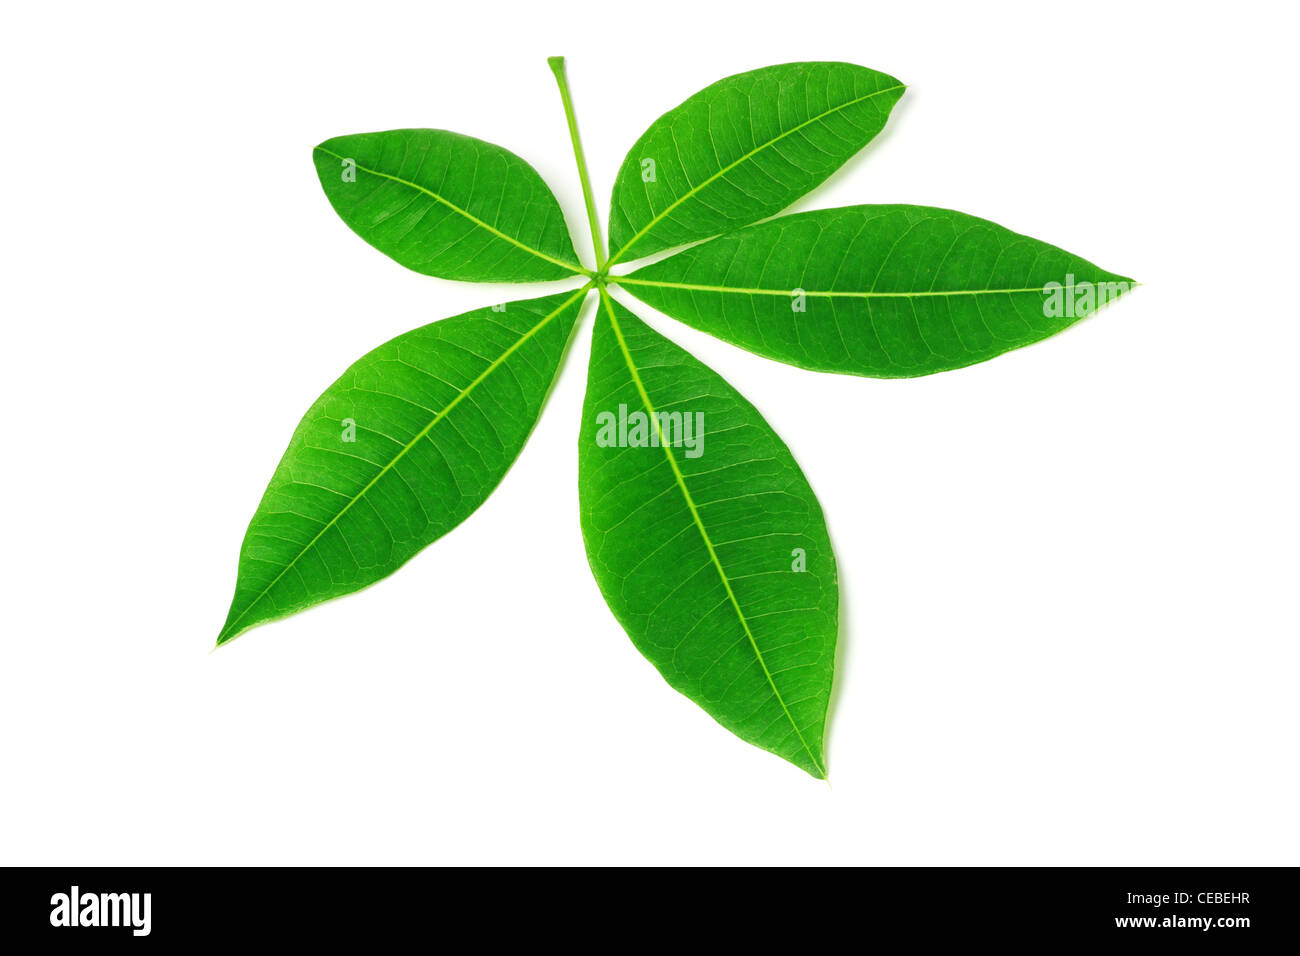 Five Petals Green Leaves on White Background Stock Photo